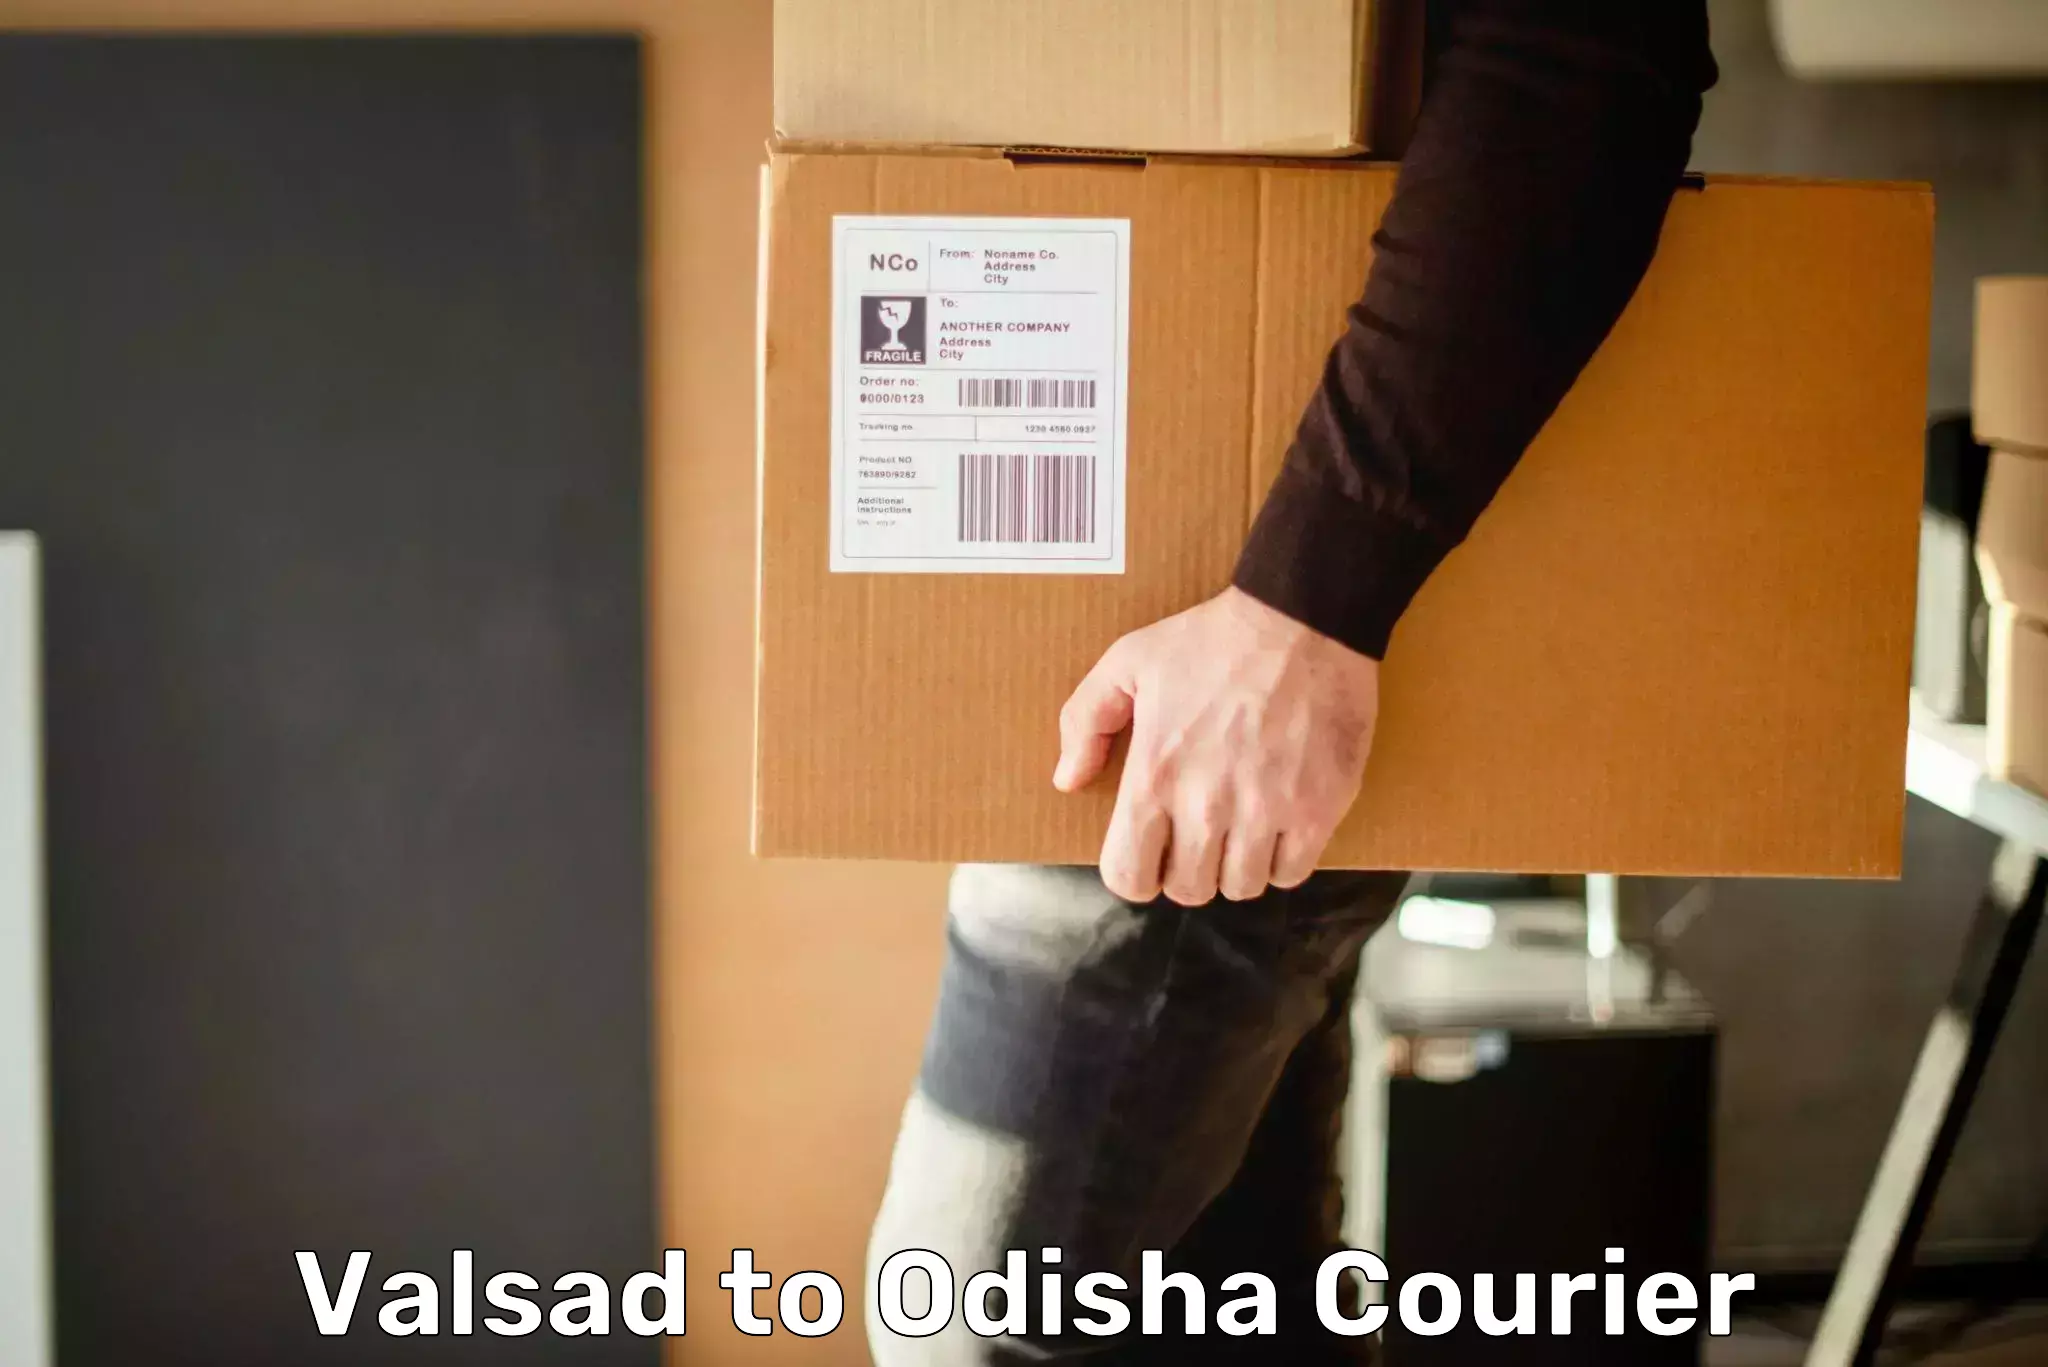 Global courier networks Valsad to Asika